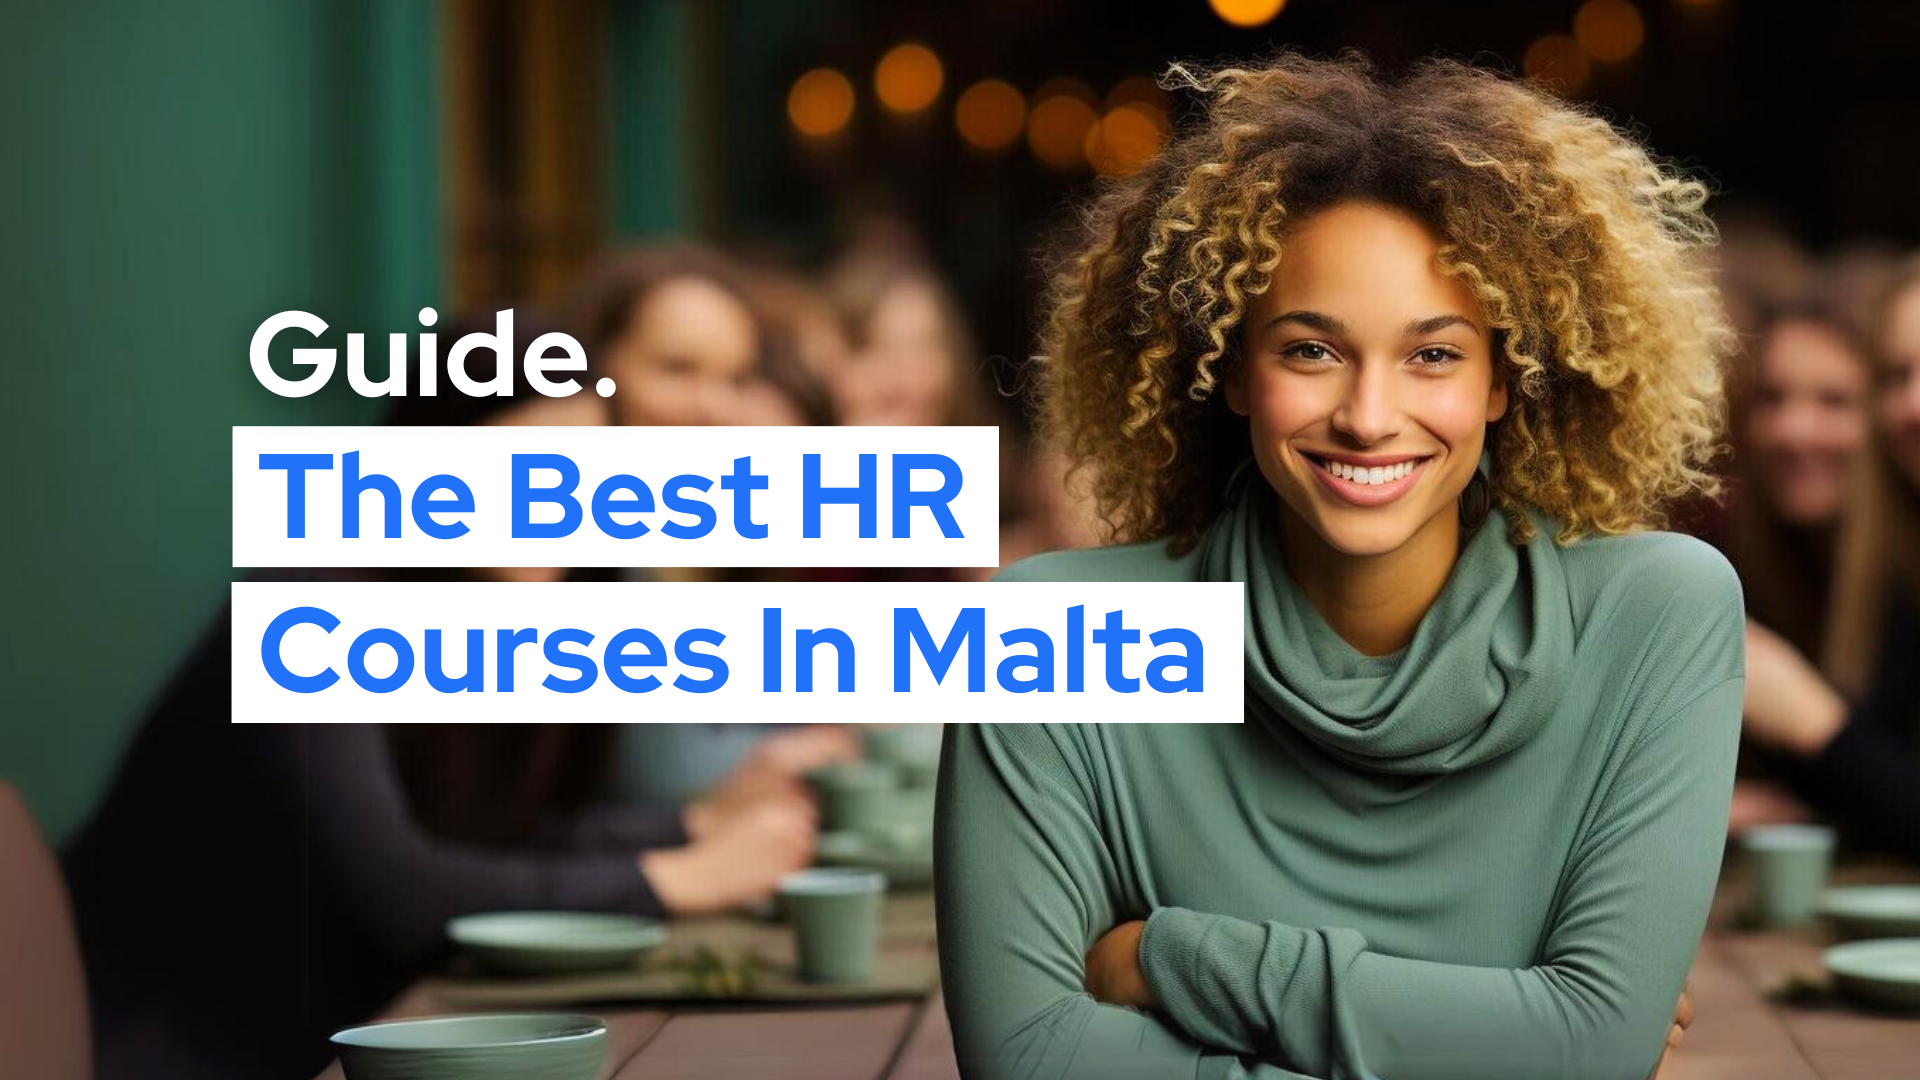 The best HR course in Malta as text. Girl smilling in background. Guide.